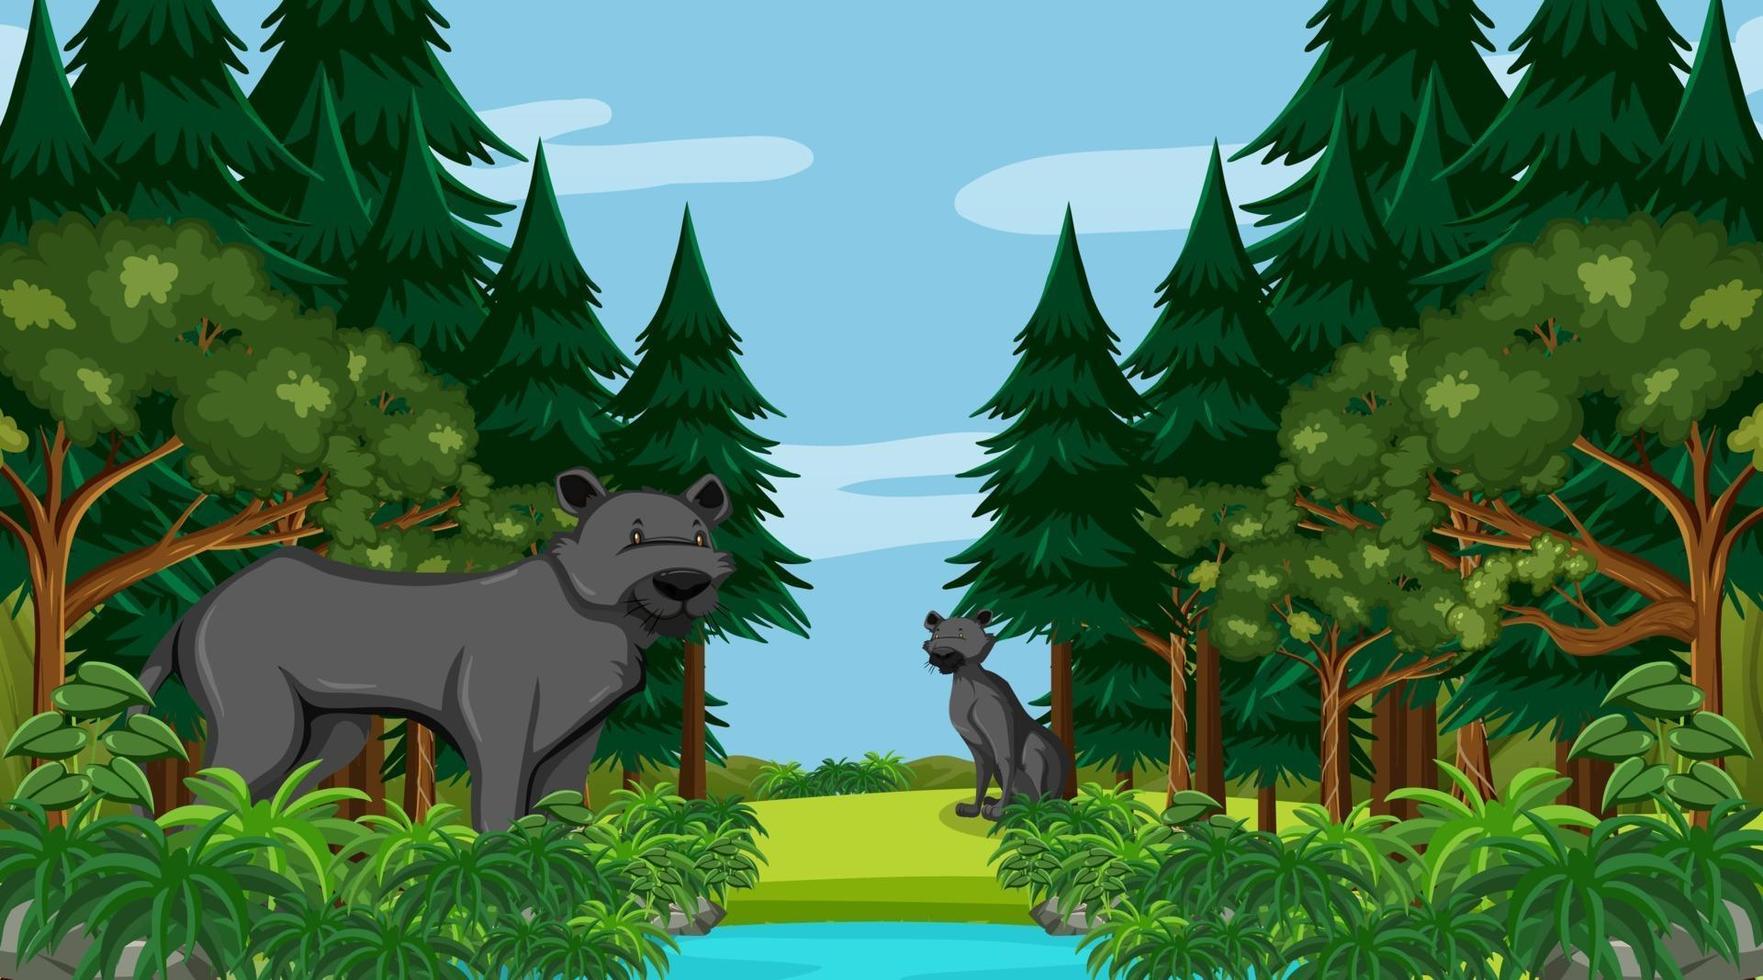 Black panther in forest scene with many trees vector